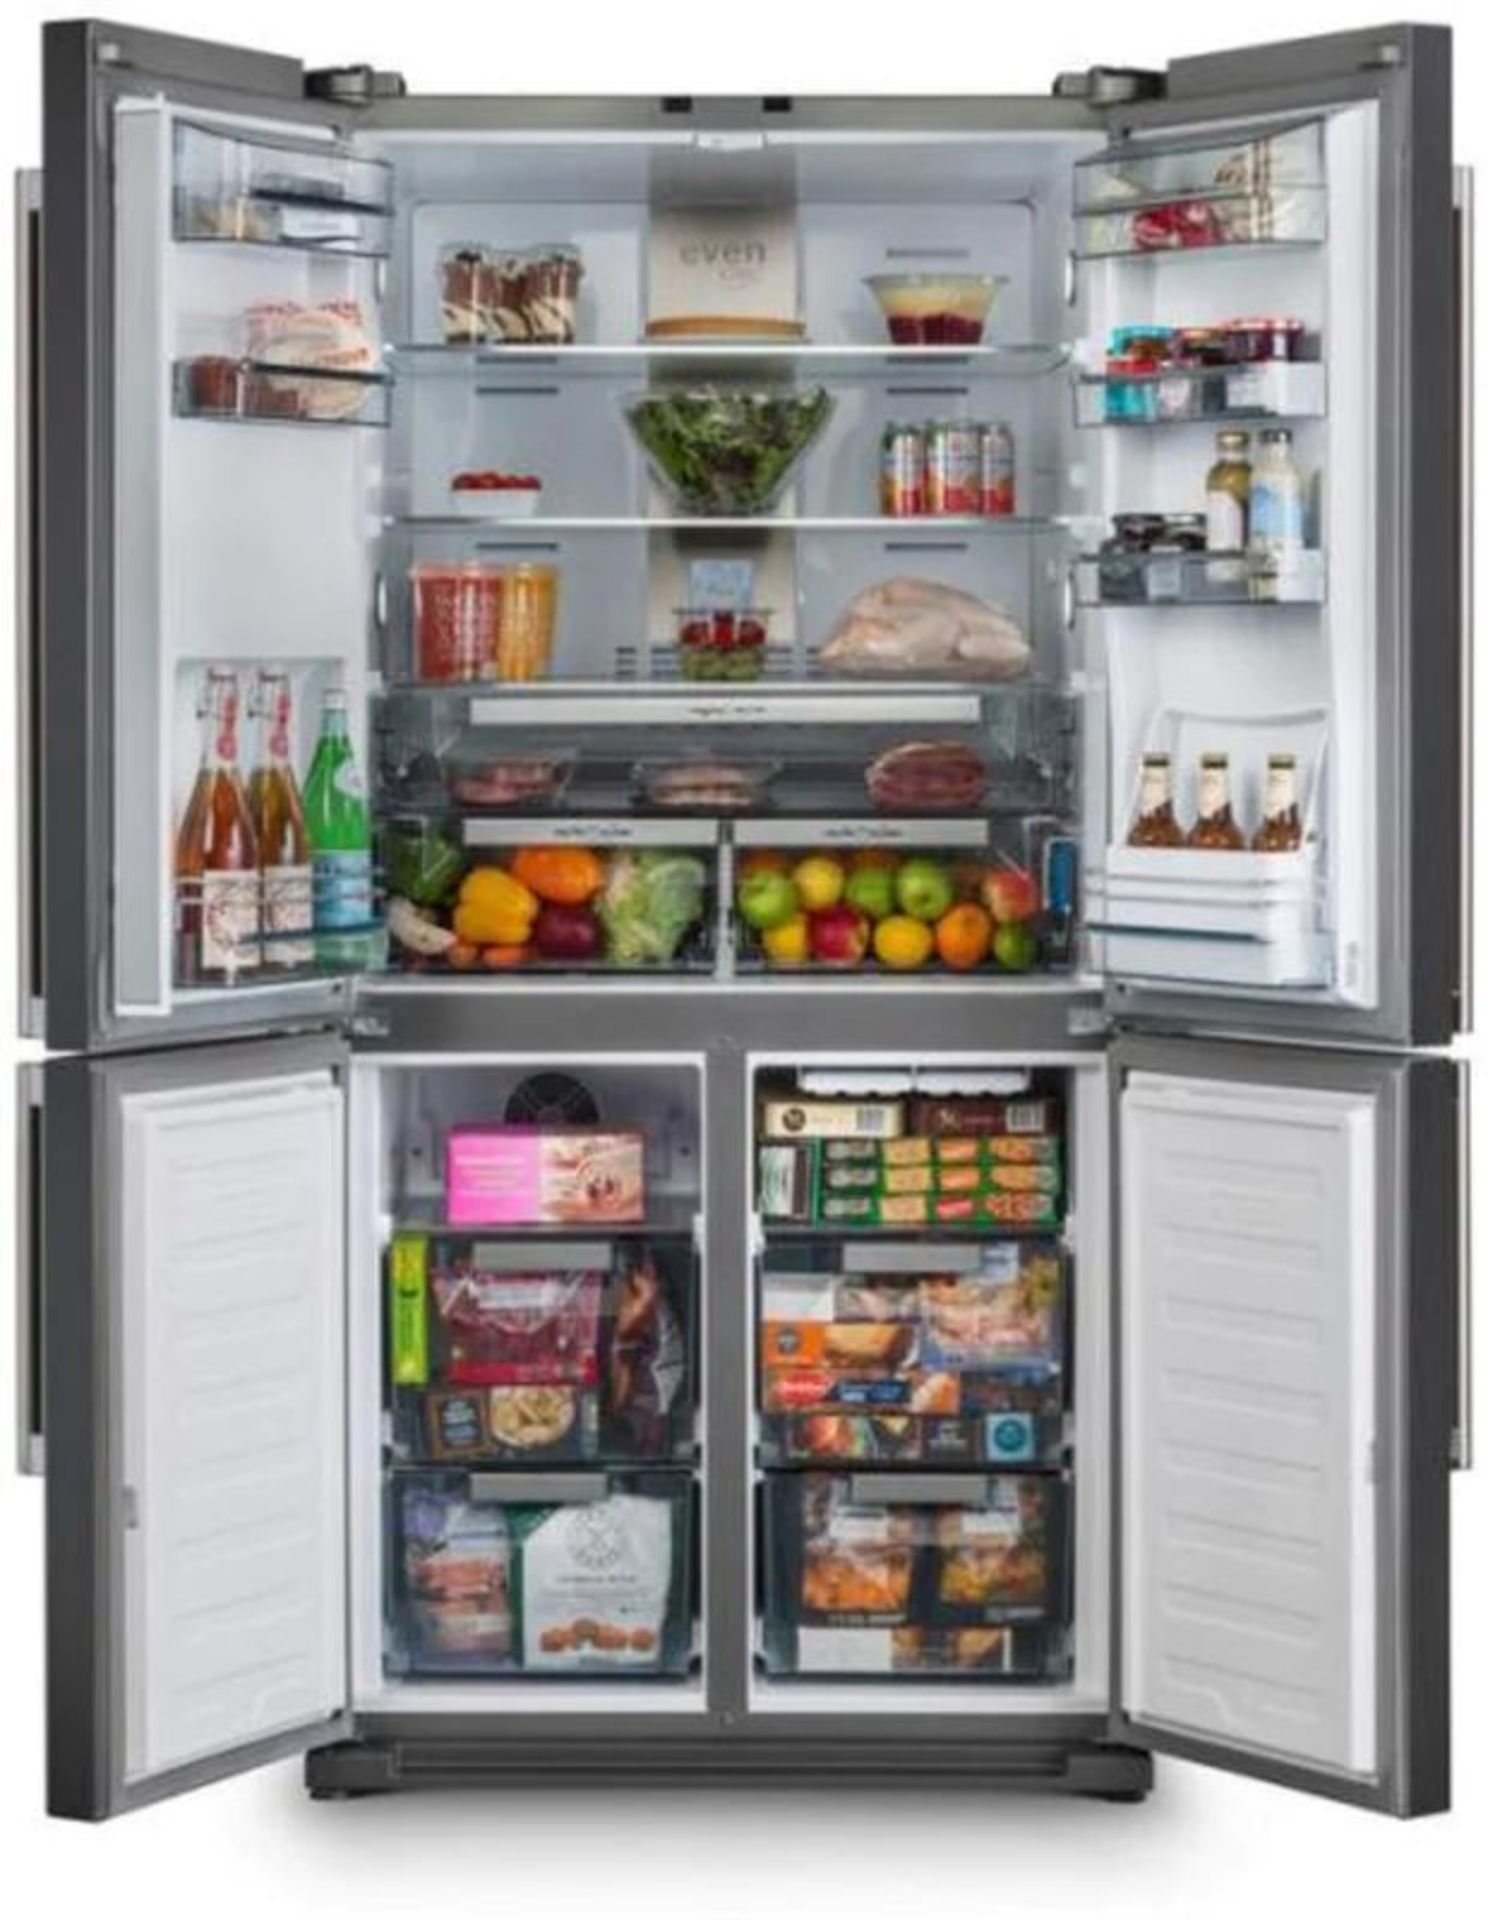 Rangemaster RSXSDL21SS-C Freestanding American Style Refrigeration - Stainless Steel. RRP £2,709.00. - Image 3 of 3